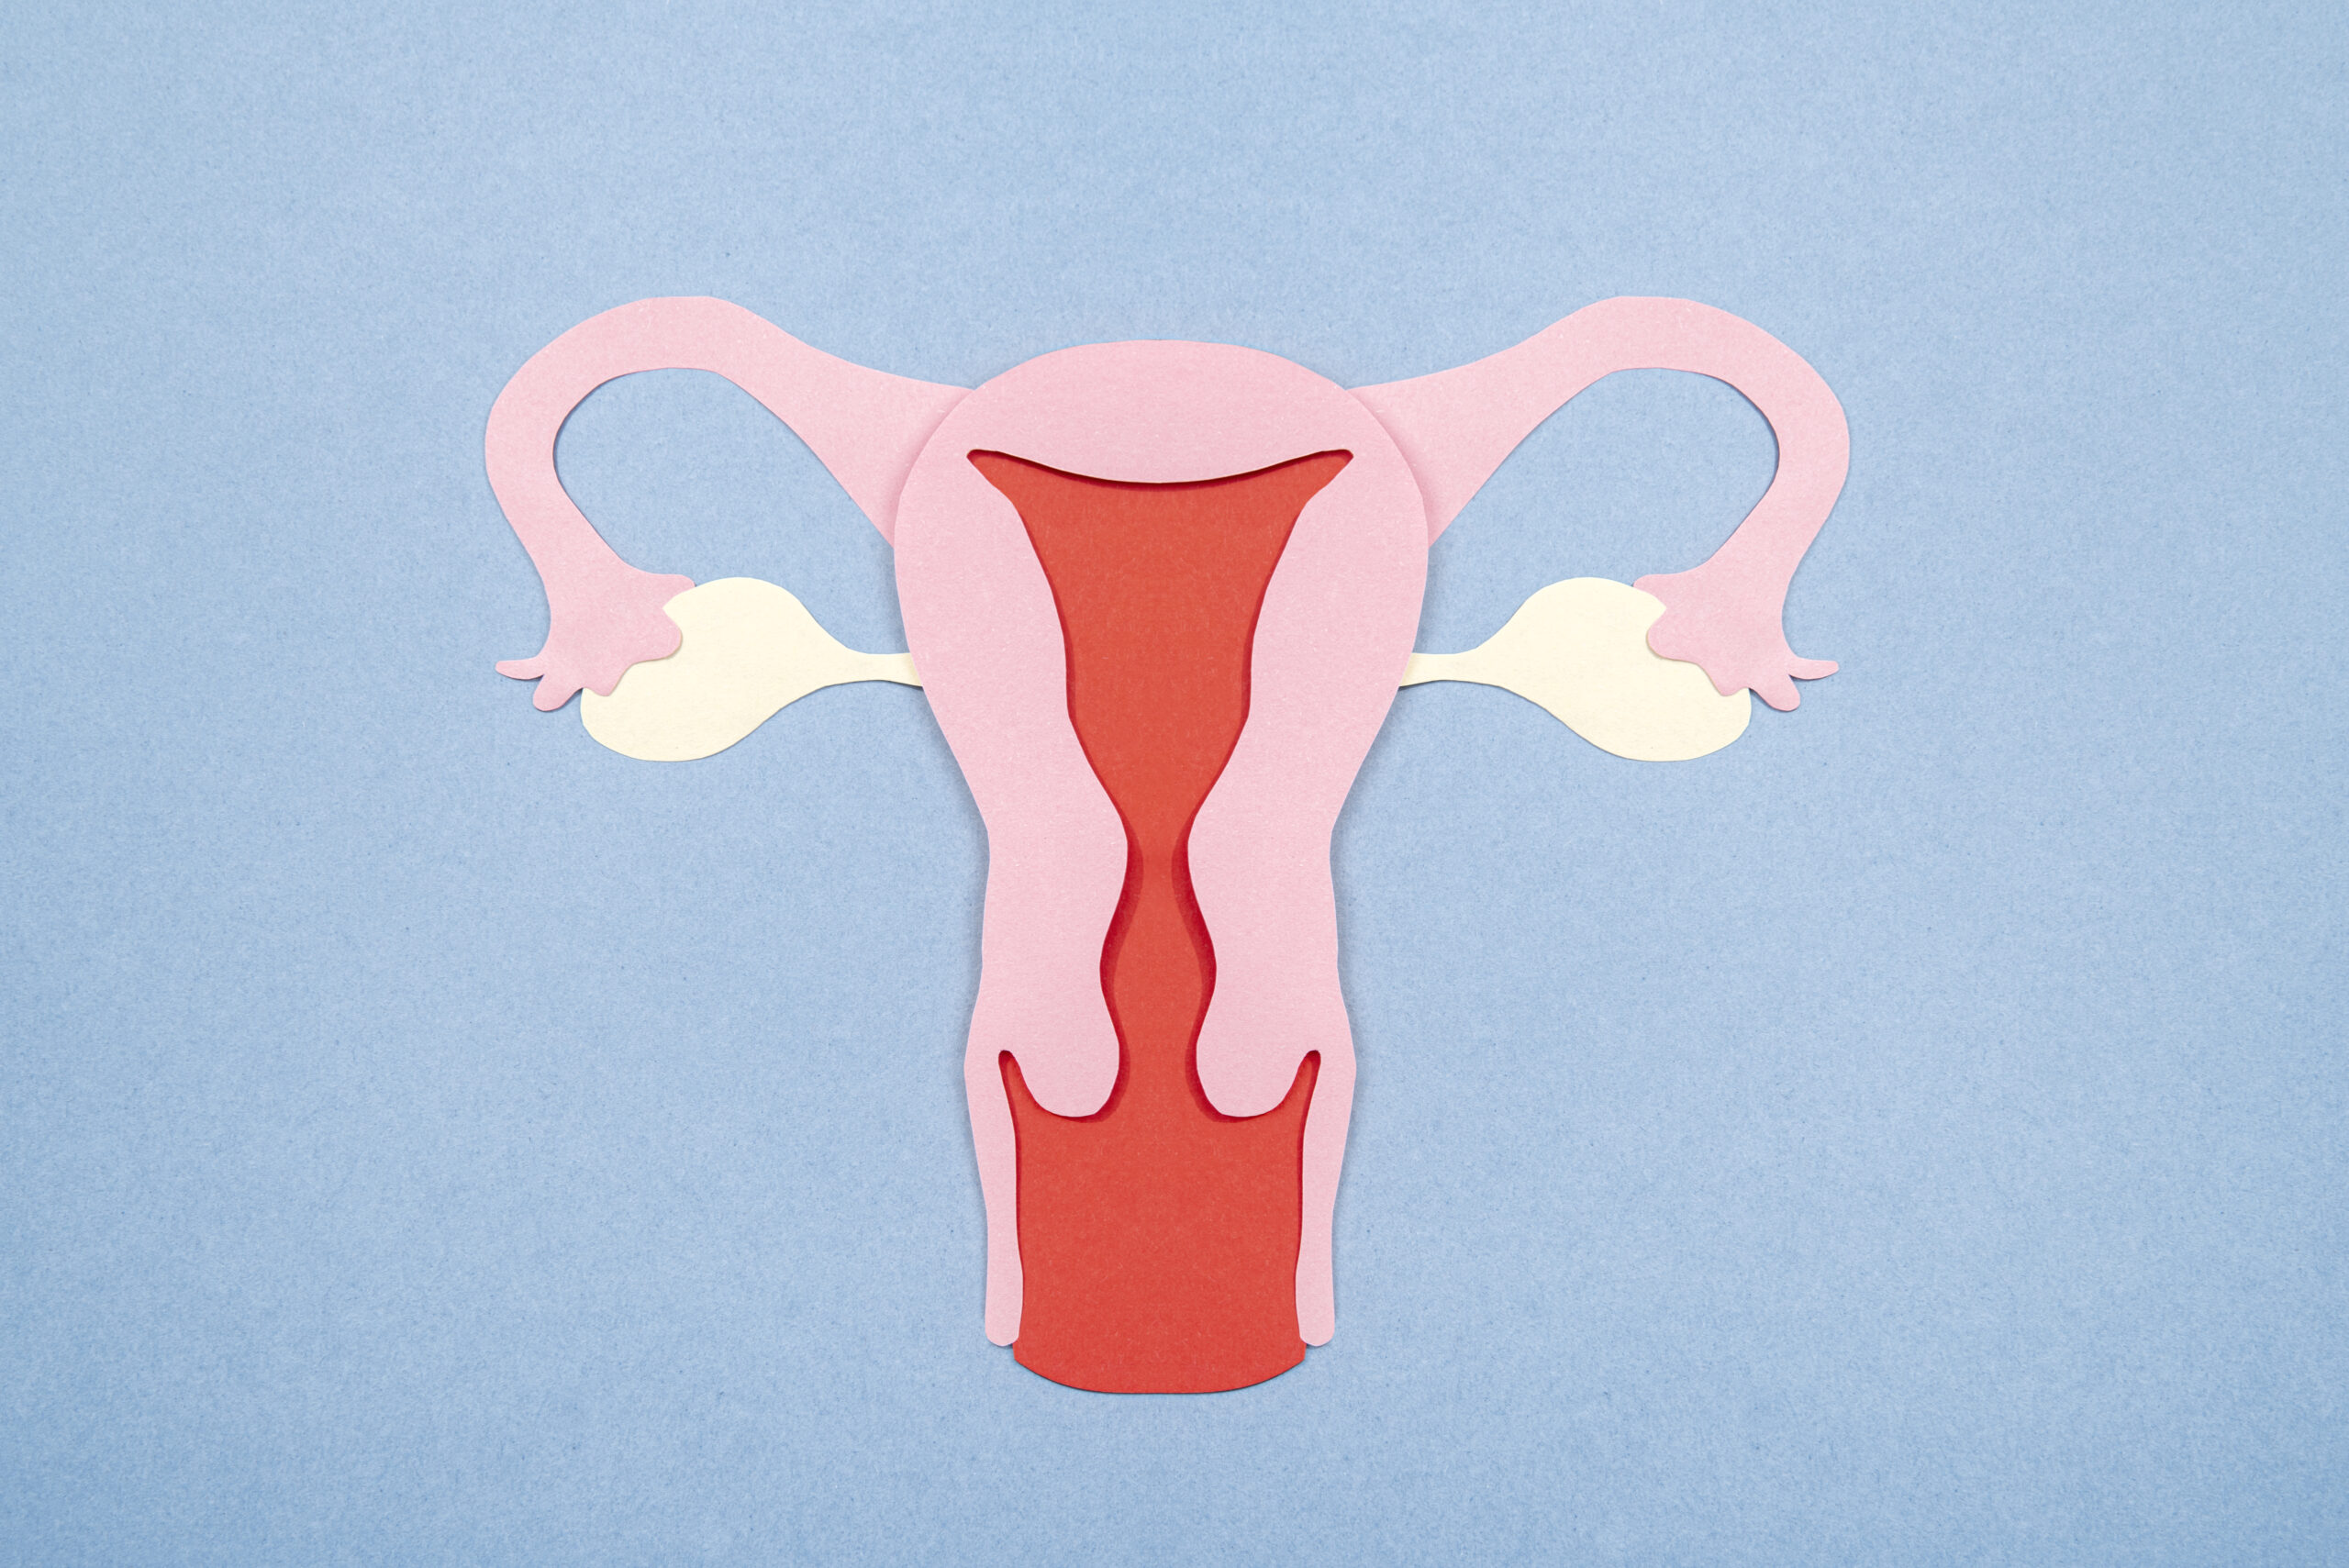 Ovarian Cancer: What Is, Causes, Symptoms, and Diagnosis